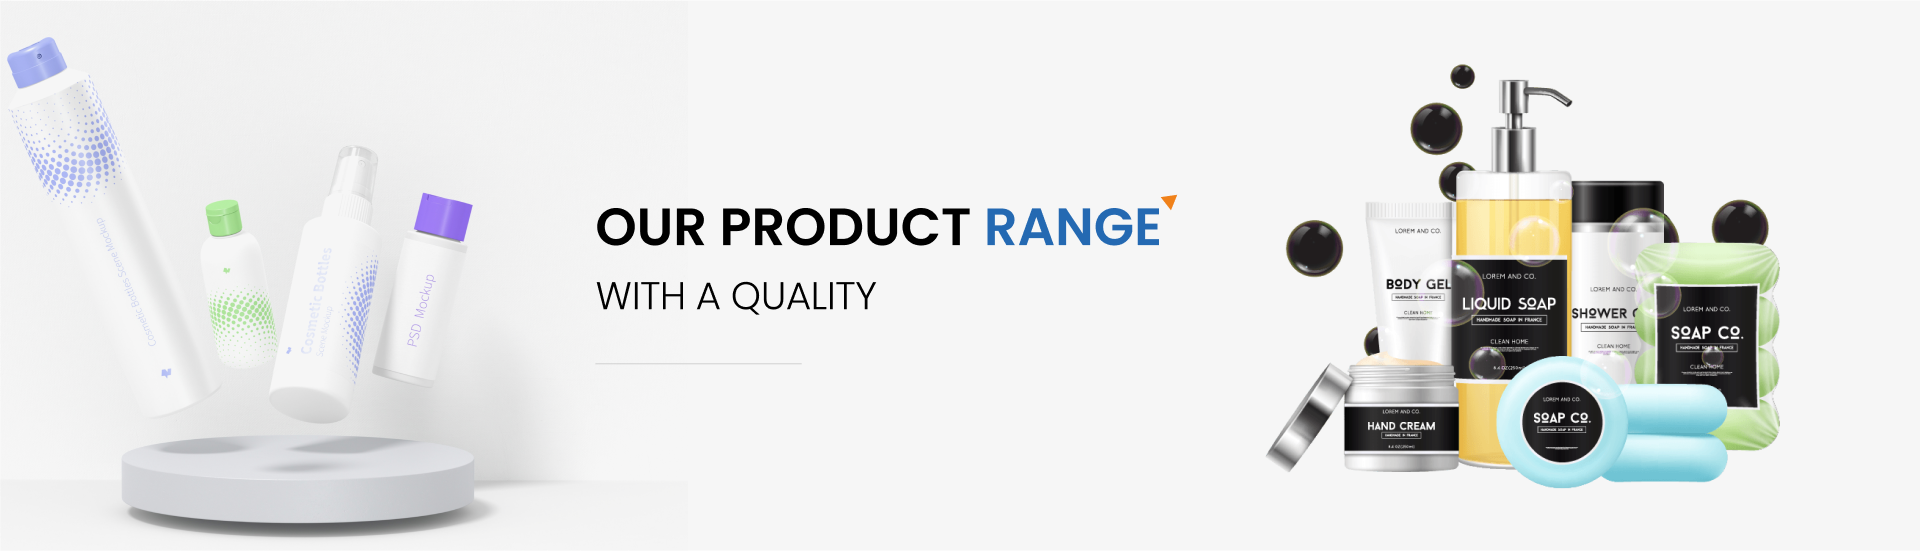 Cosmetic Manufacturer Product Range